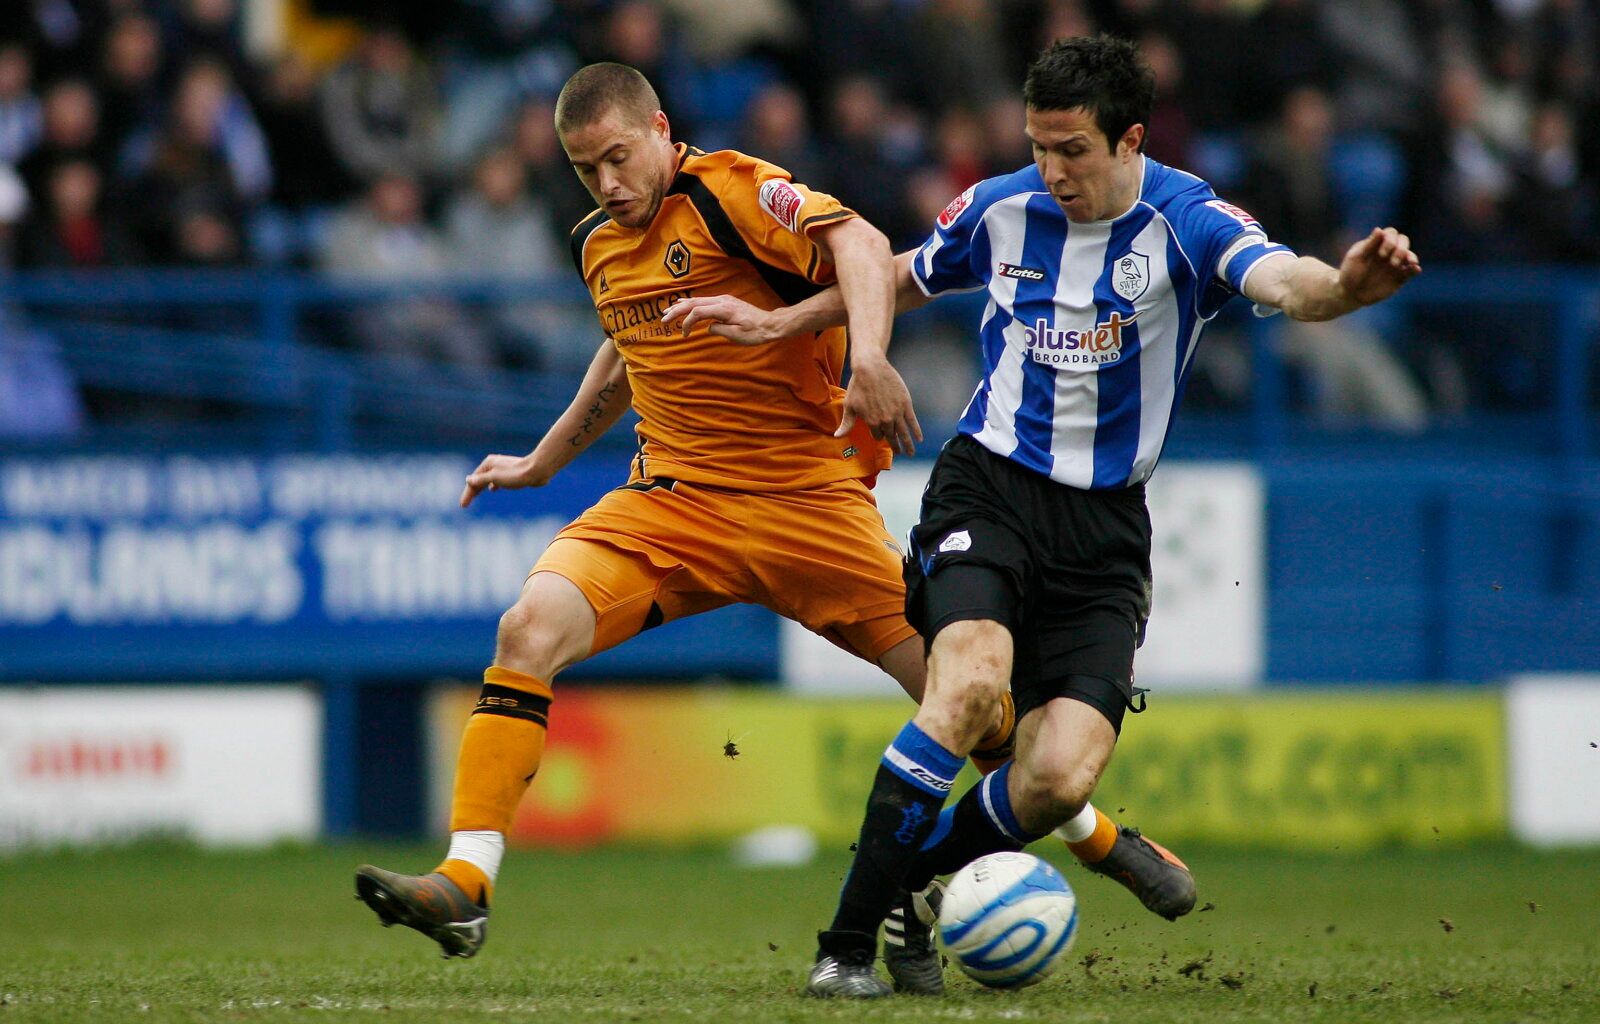 Football - Sheffield Wednesday v Wolverhampton Wanderers Coca-Cola Football League Championship - Hillsborough - 7/3/09 
Wolves' Michael Kightly (L) and Sheffield Wednesday's Richard Wood in action 
Mandatory Credit: Action Images / Craig Brough 
Livepic